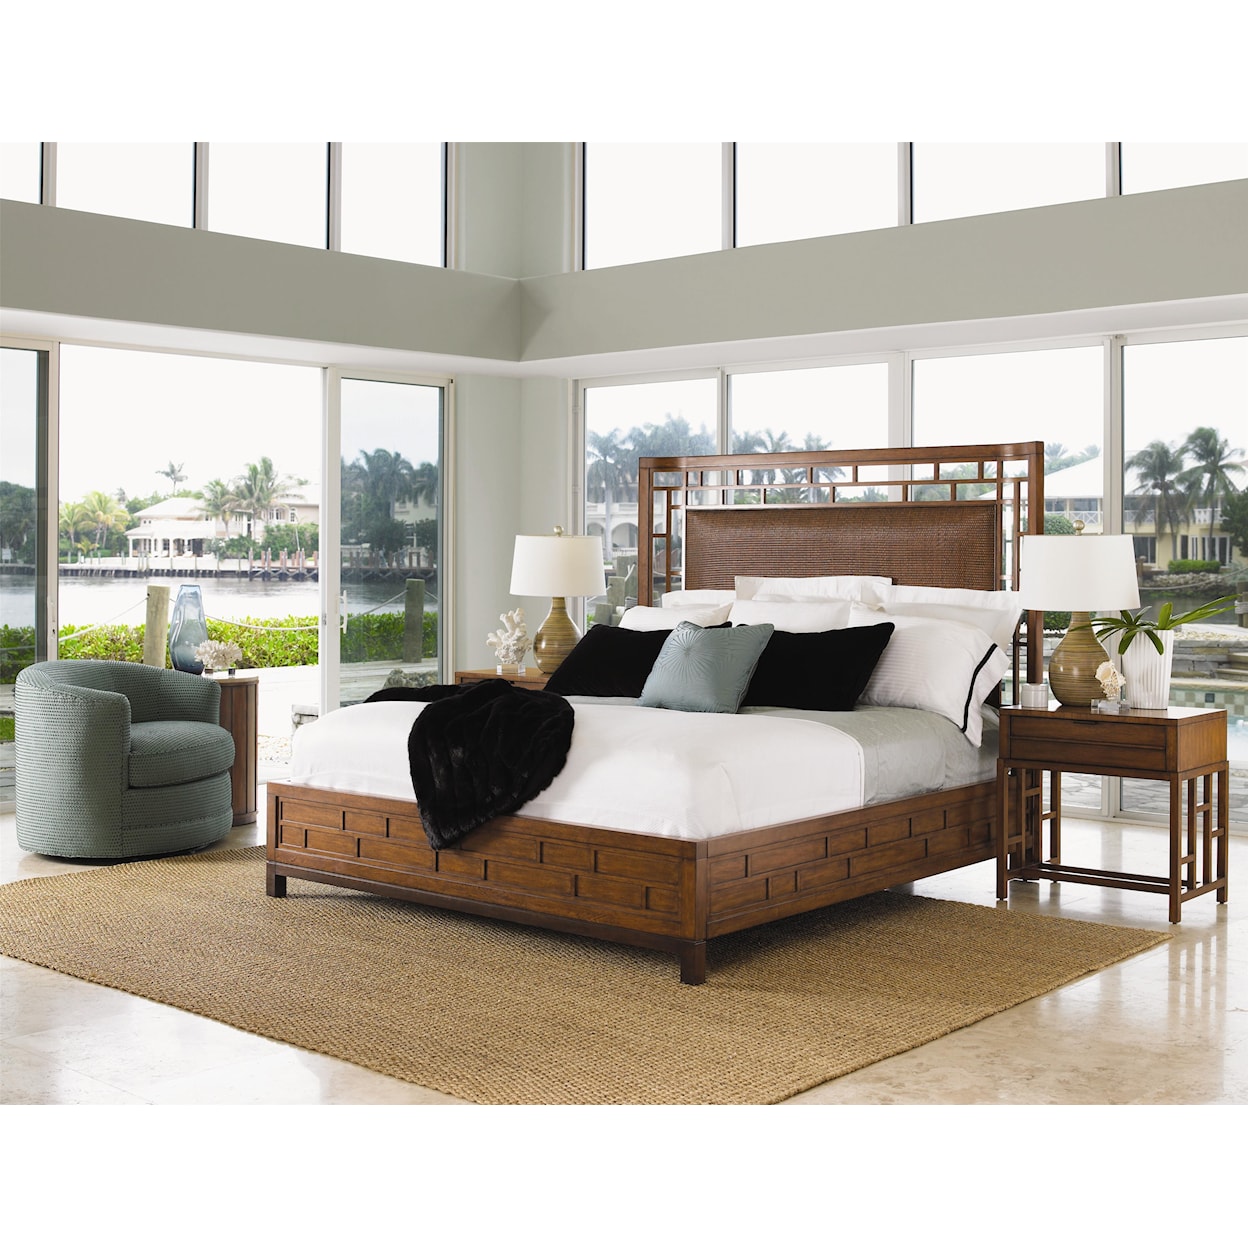 Tommy Bahama Home Ocean Club California King Paradise Point Bed